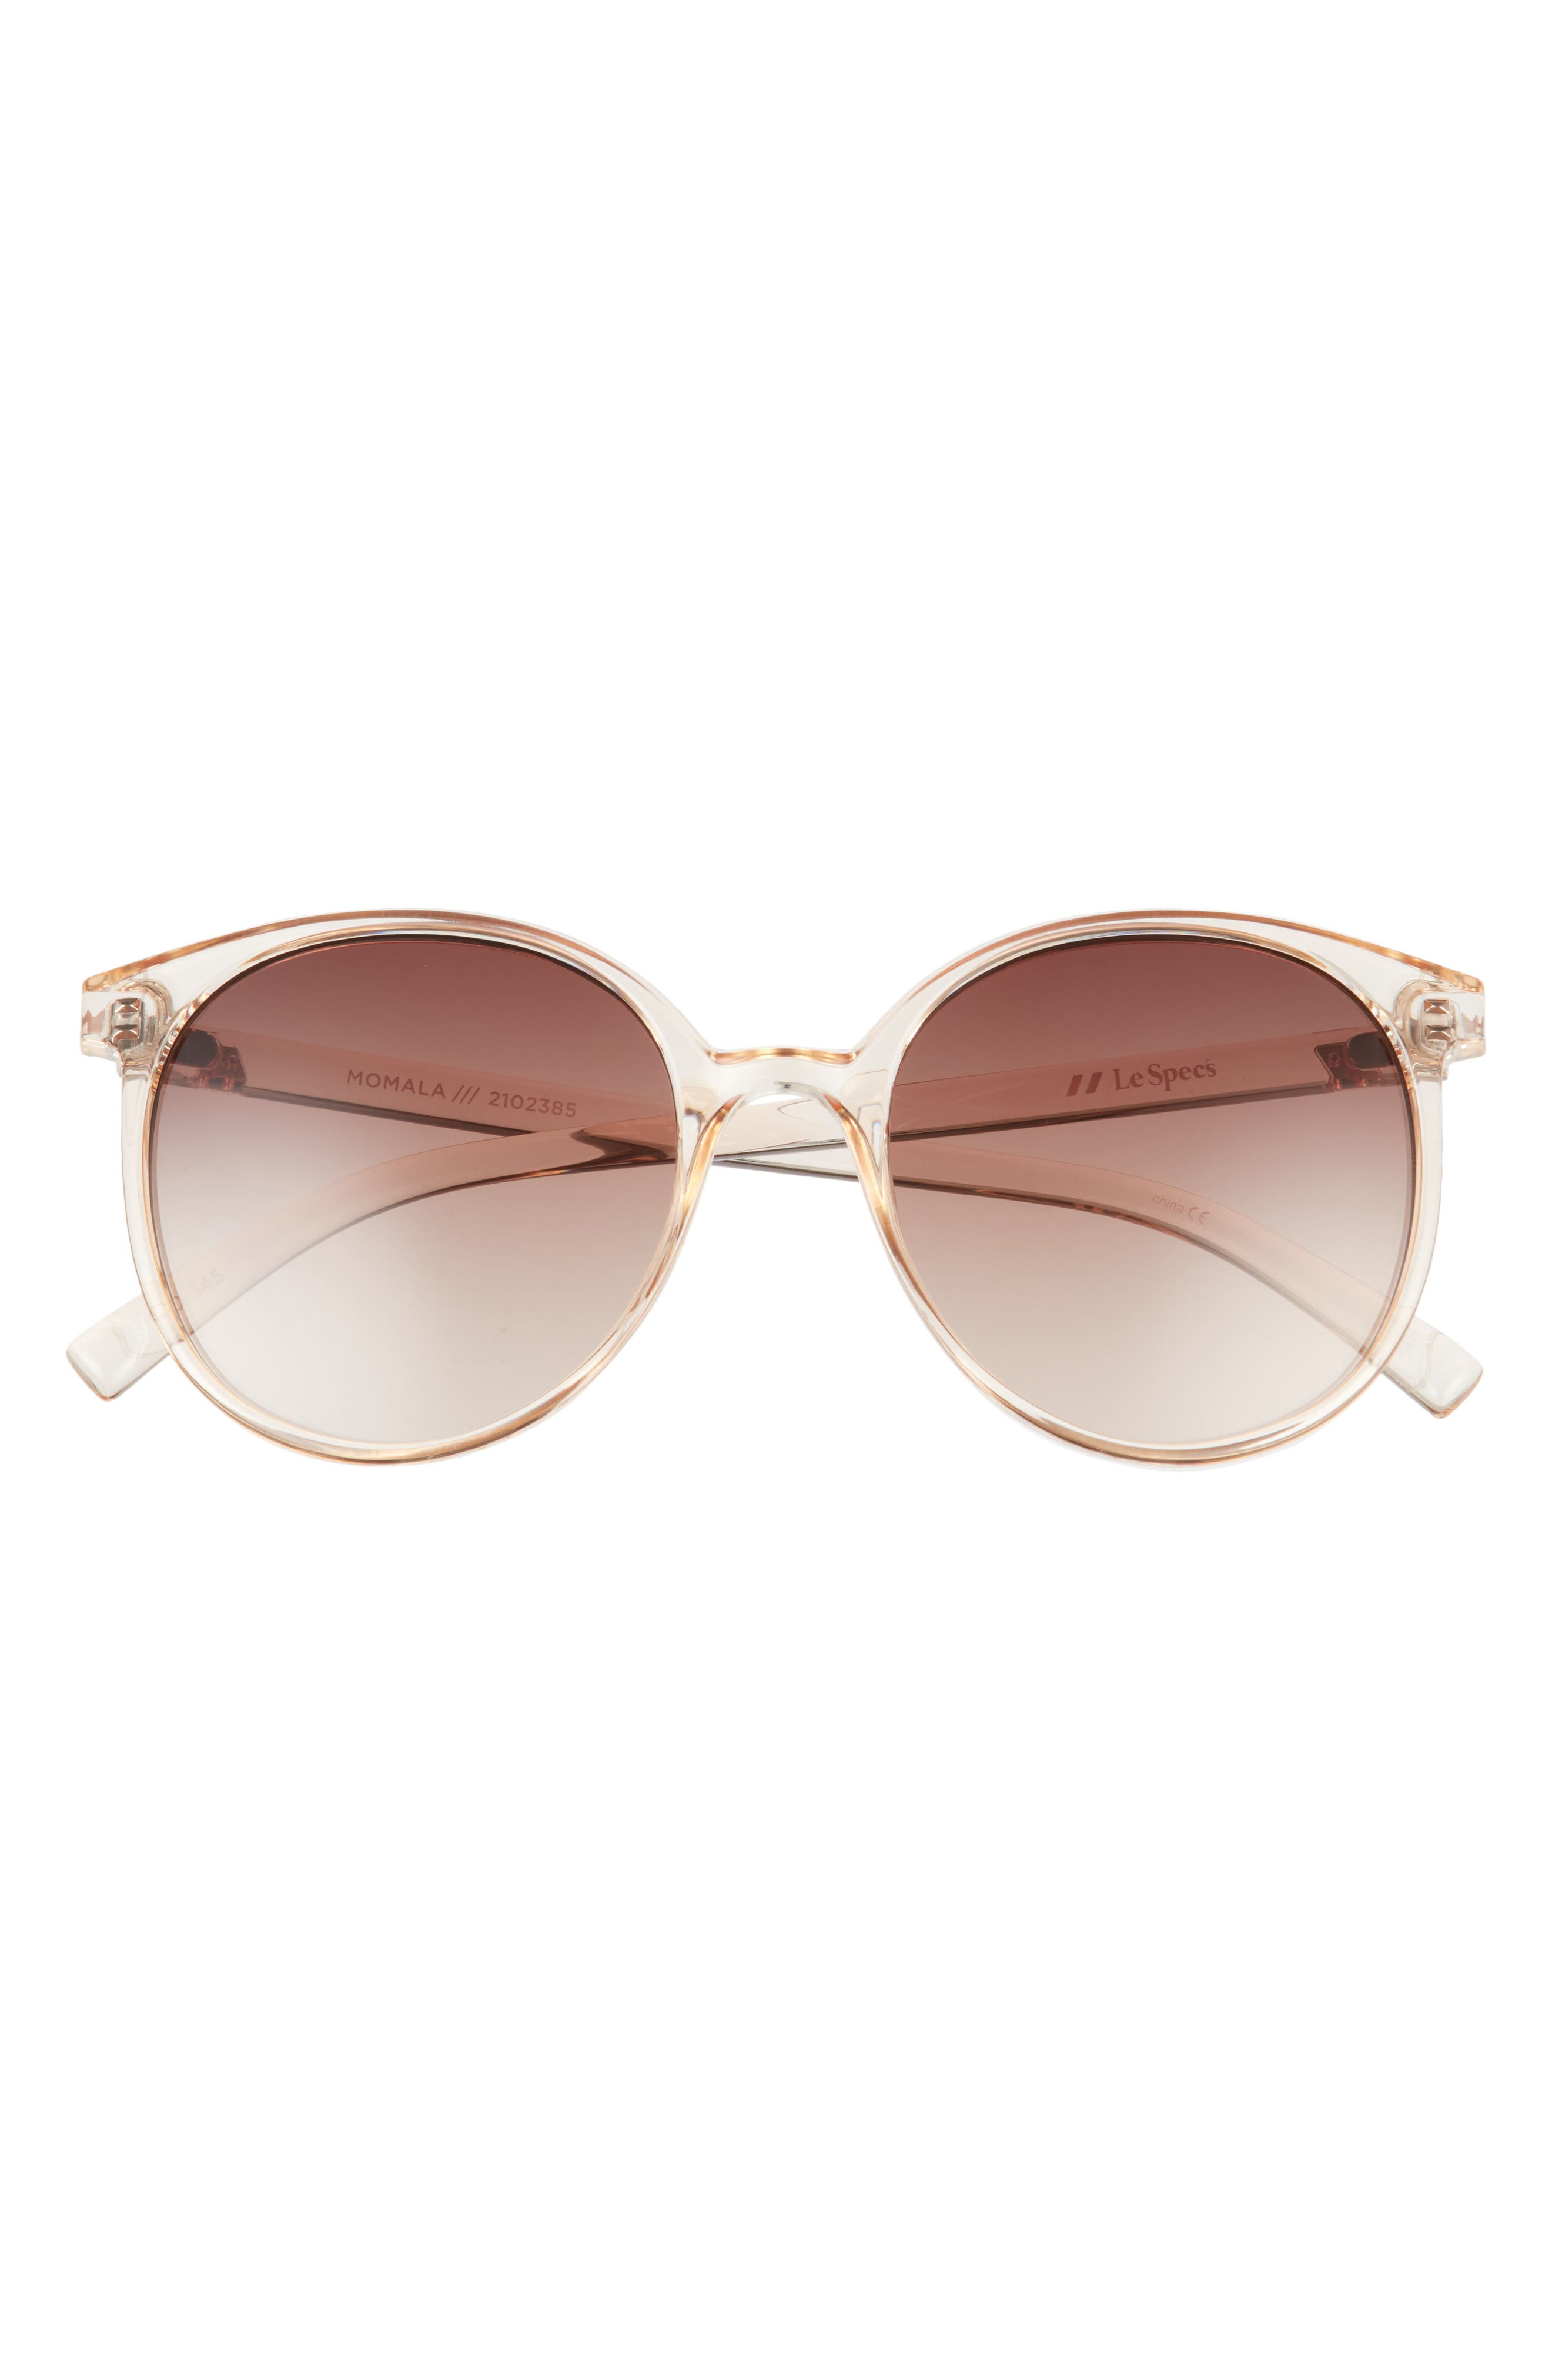 Le Specs Momala 54mm Round Sunglasses in Nougat /Brown Grad at Nordstrom